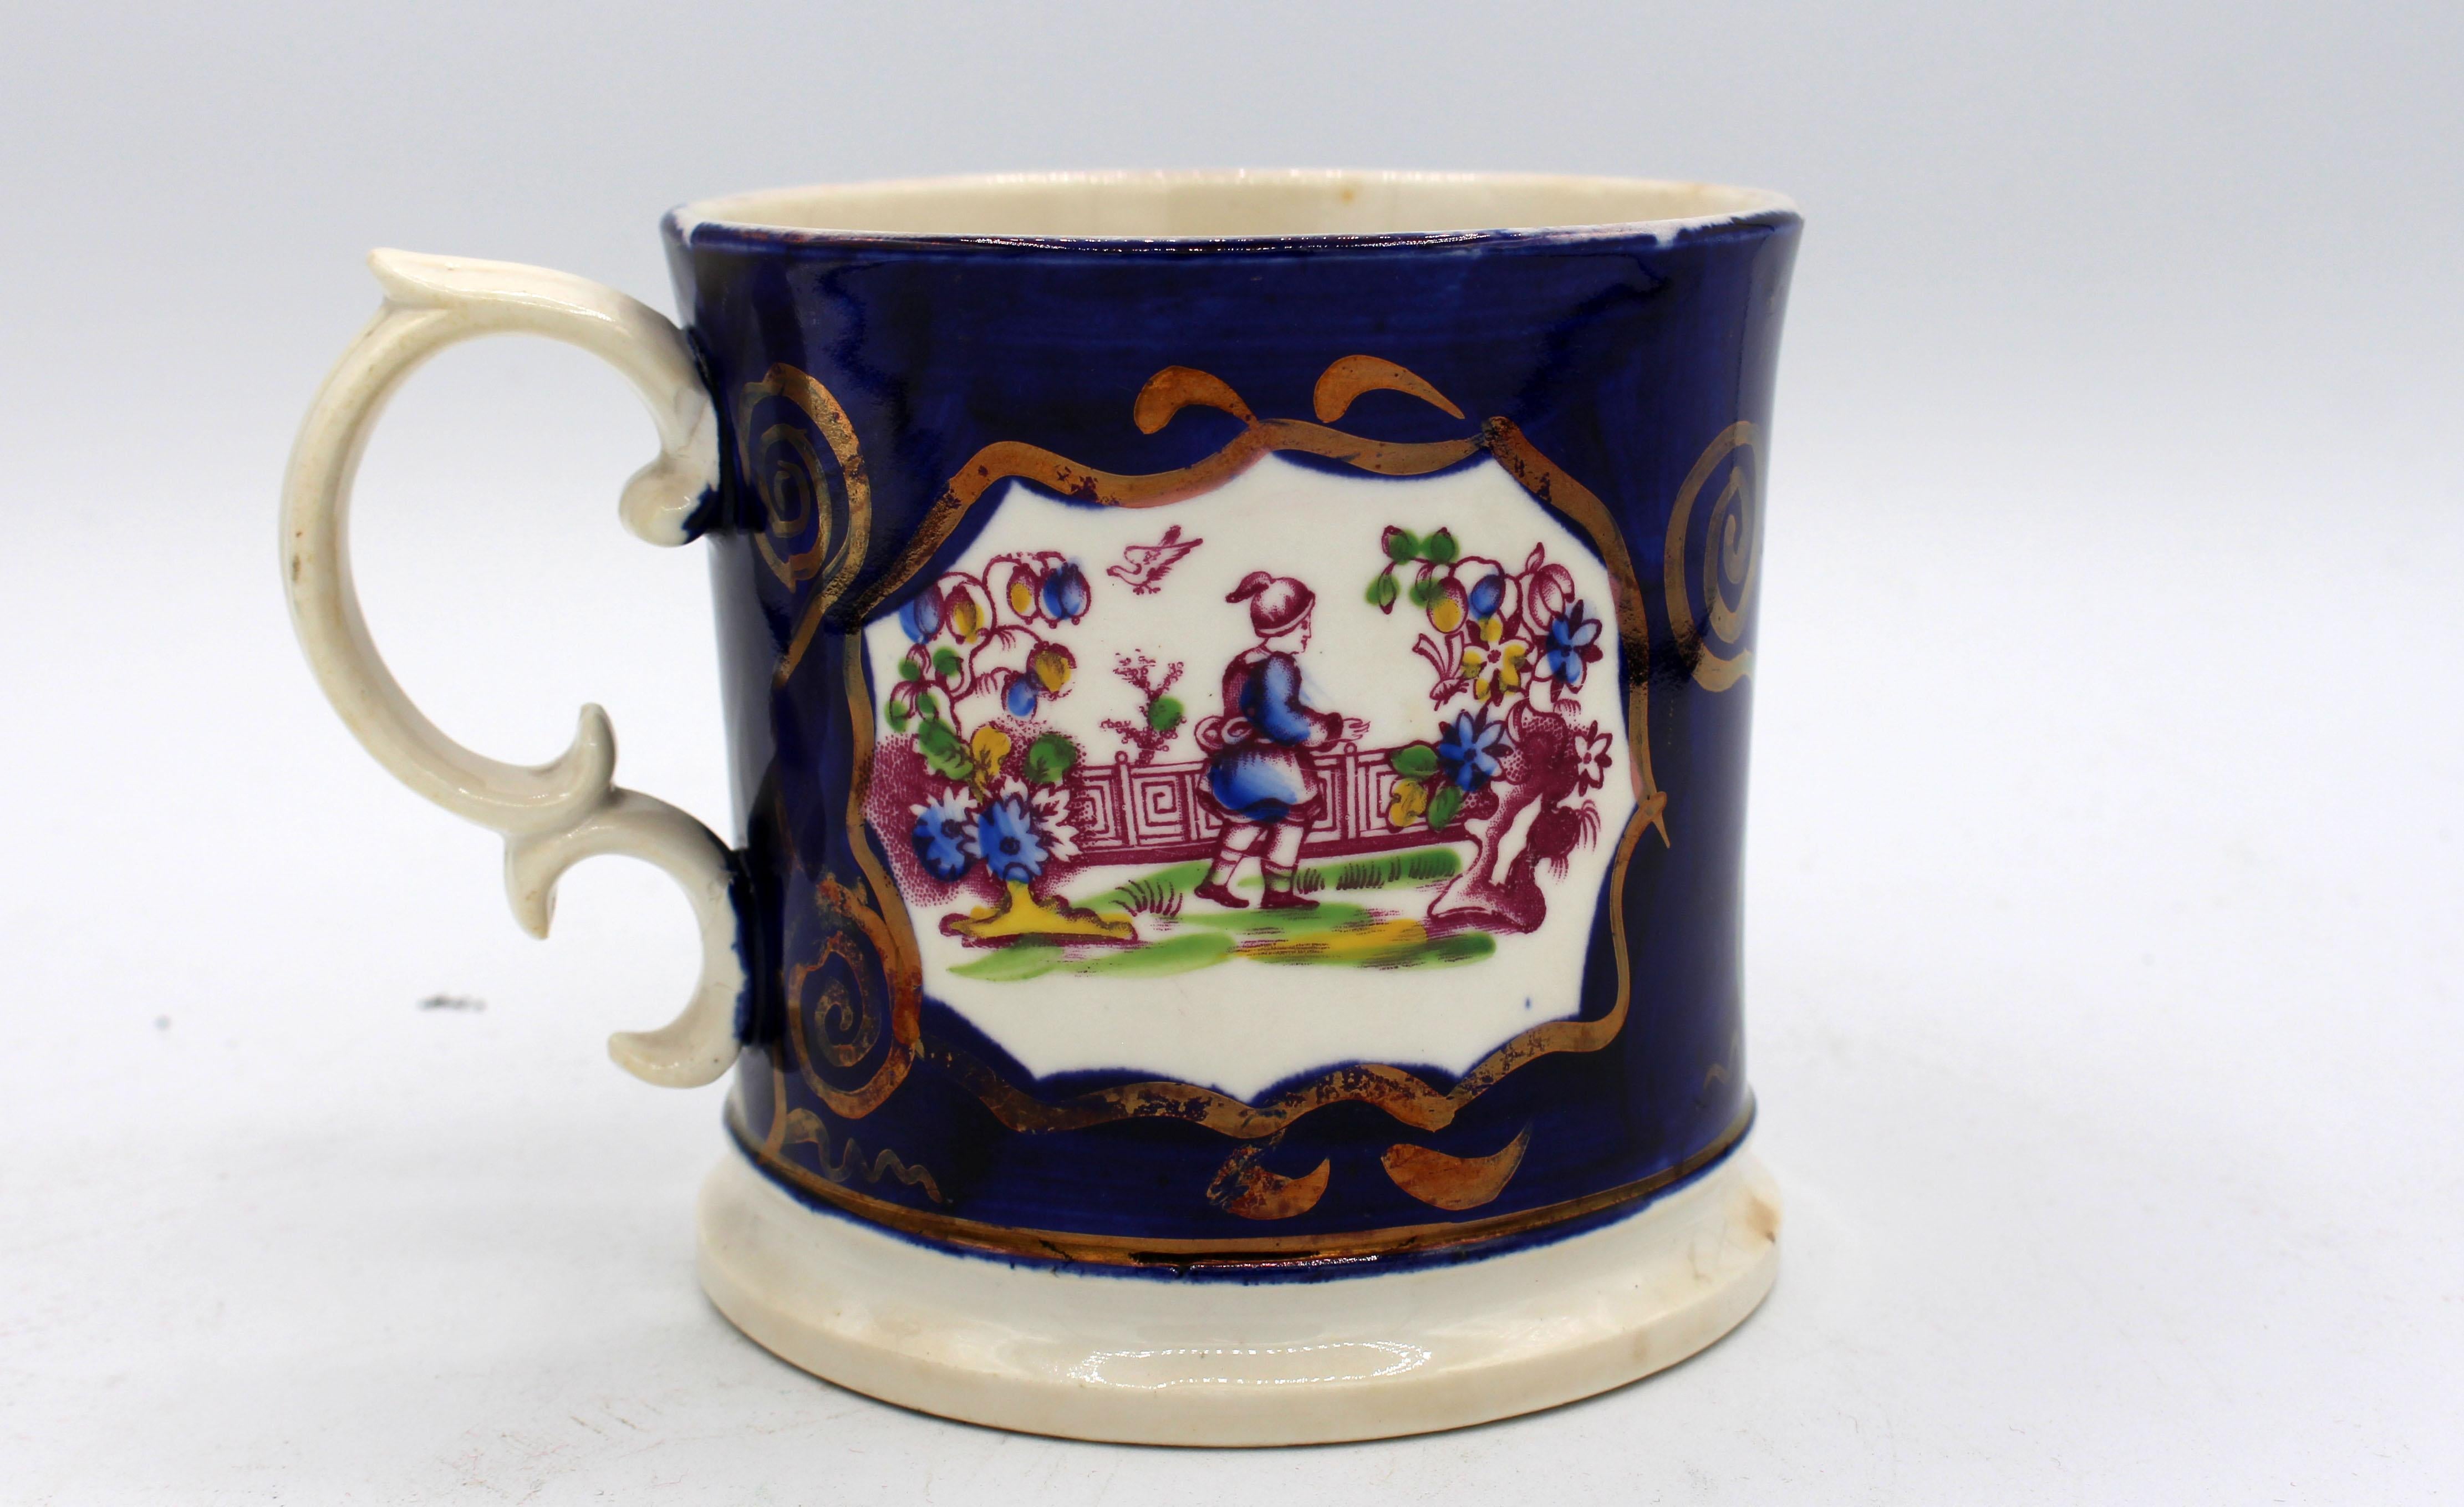 Gaudy Welsh porcelain tankard, c.1840-50, with double c-handle. Reserves in Chinoiserie taste with copper luster on cobalt body. Star hairline in base. 5 1/2